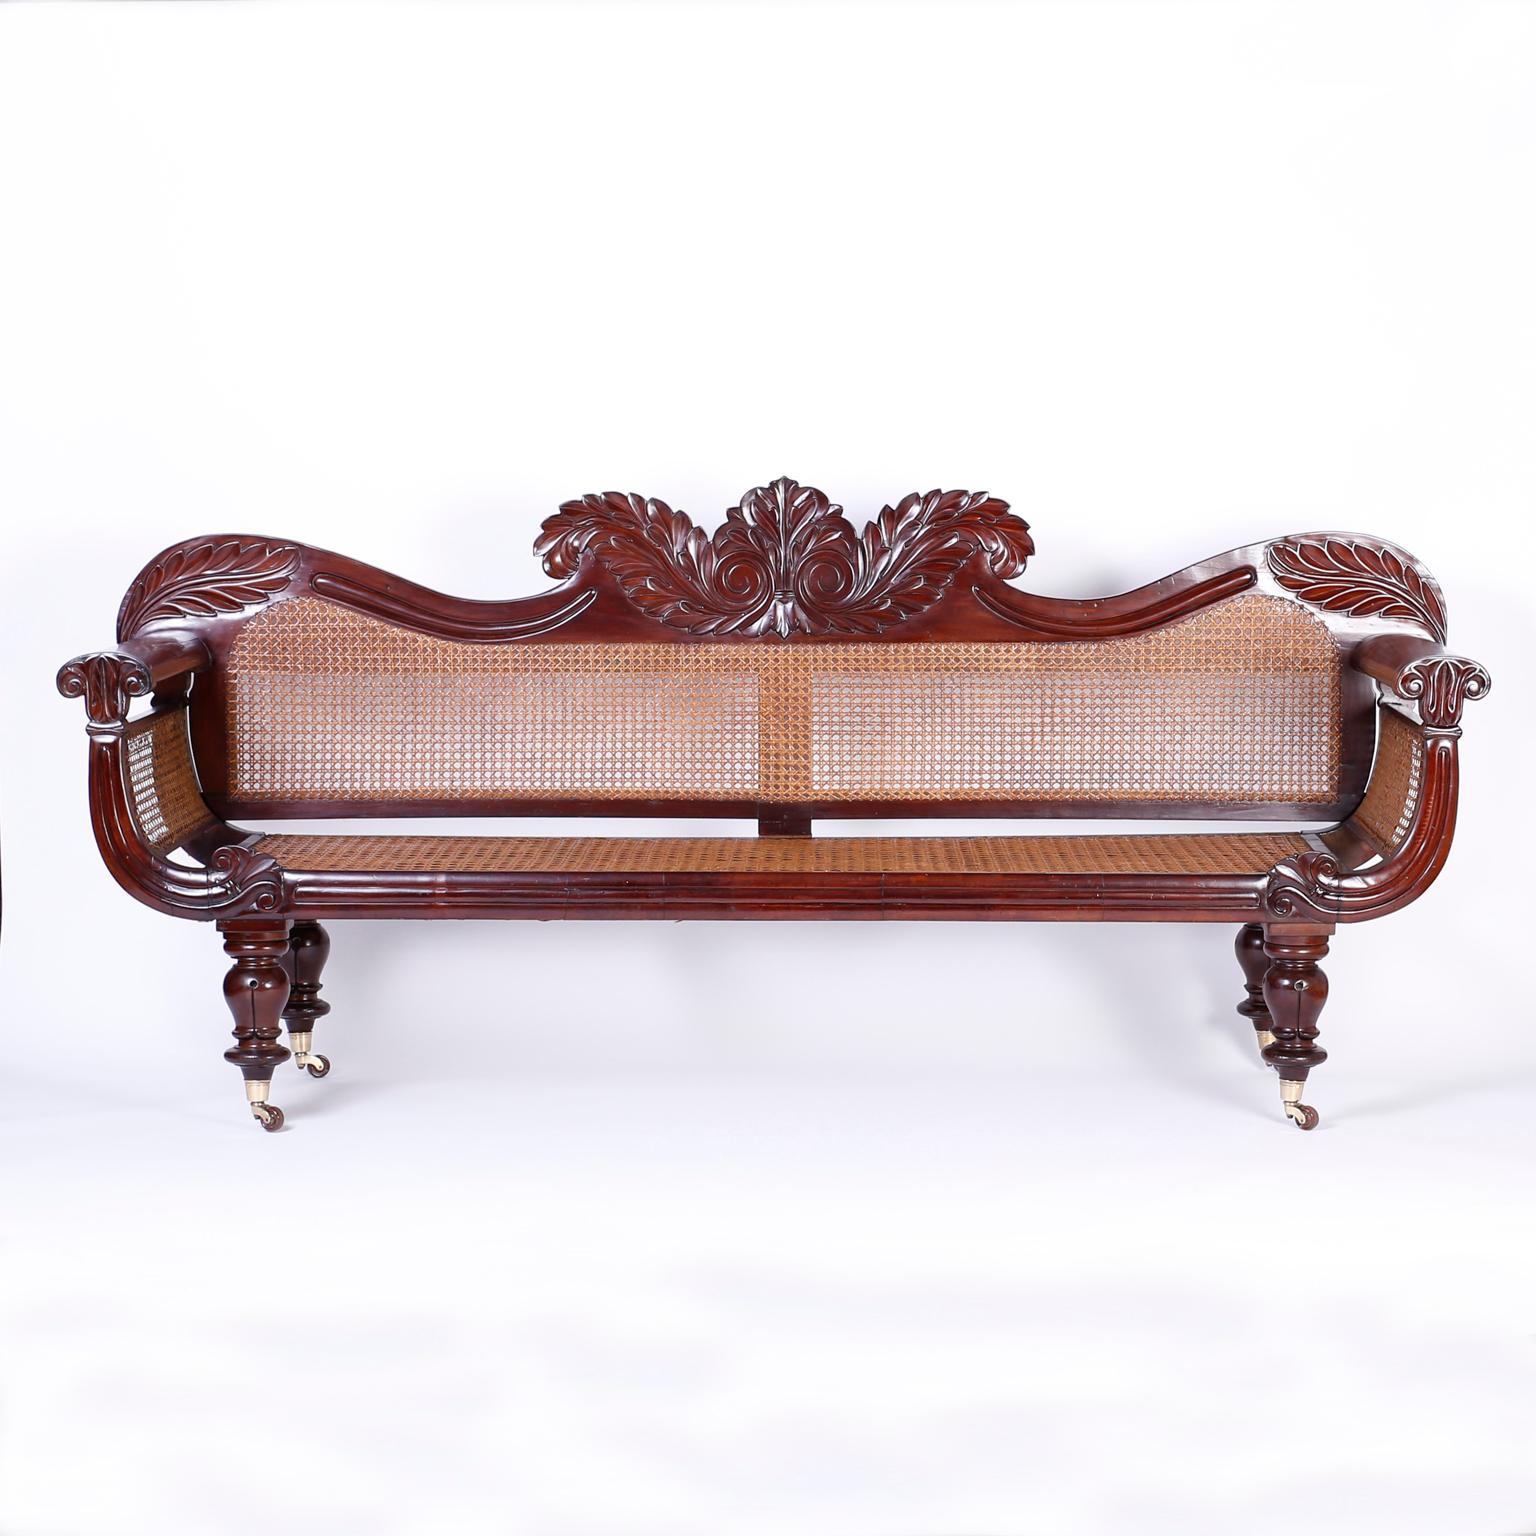 Fine British Colonial mahogany settee, from the West Indies, with dramatic acanthus carvings on the crest and arms with a caned back, sides and seat. Having turned legs on brass casters and an over all elegant form with expert craftsmanship and a